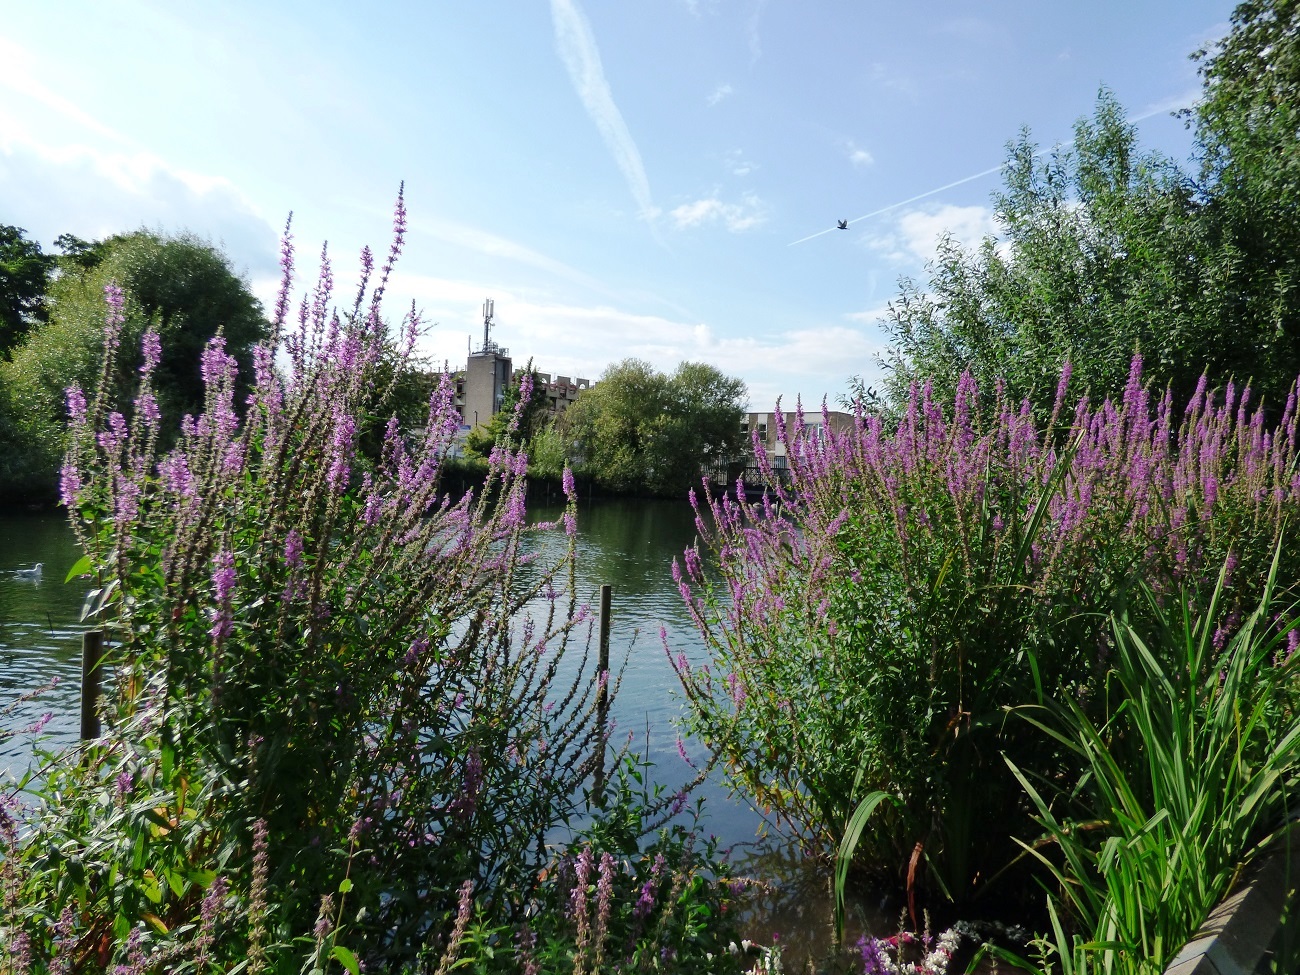 20160810_Borough-of-Sutton_Waddon-Ponds_Flying-over-Waddon-Pond